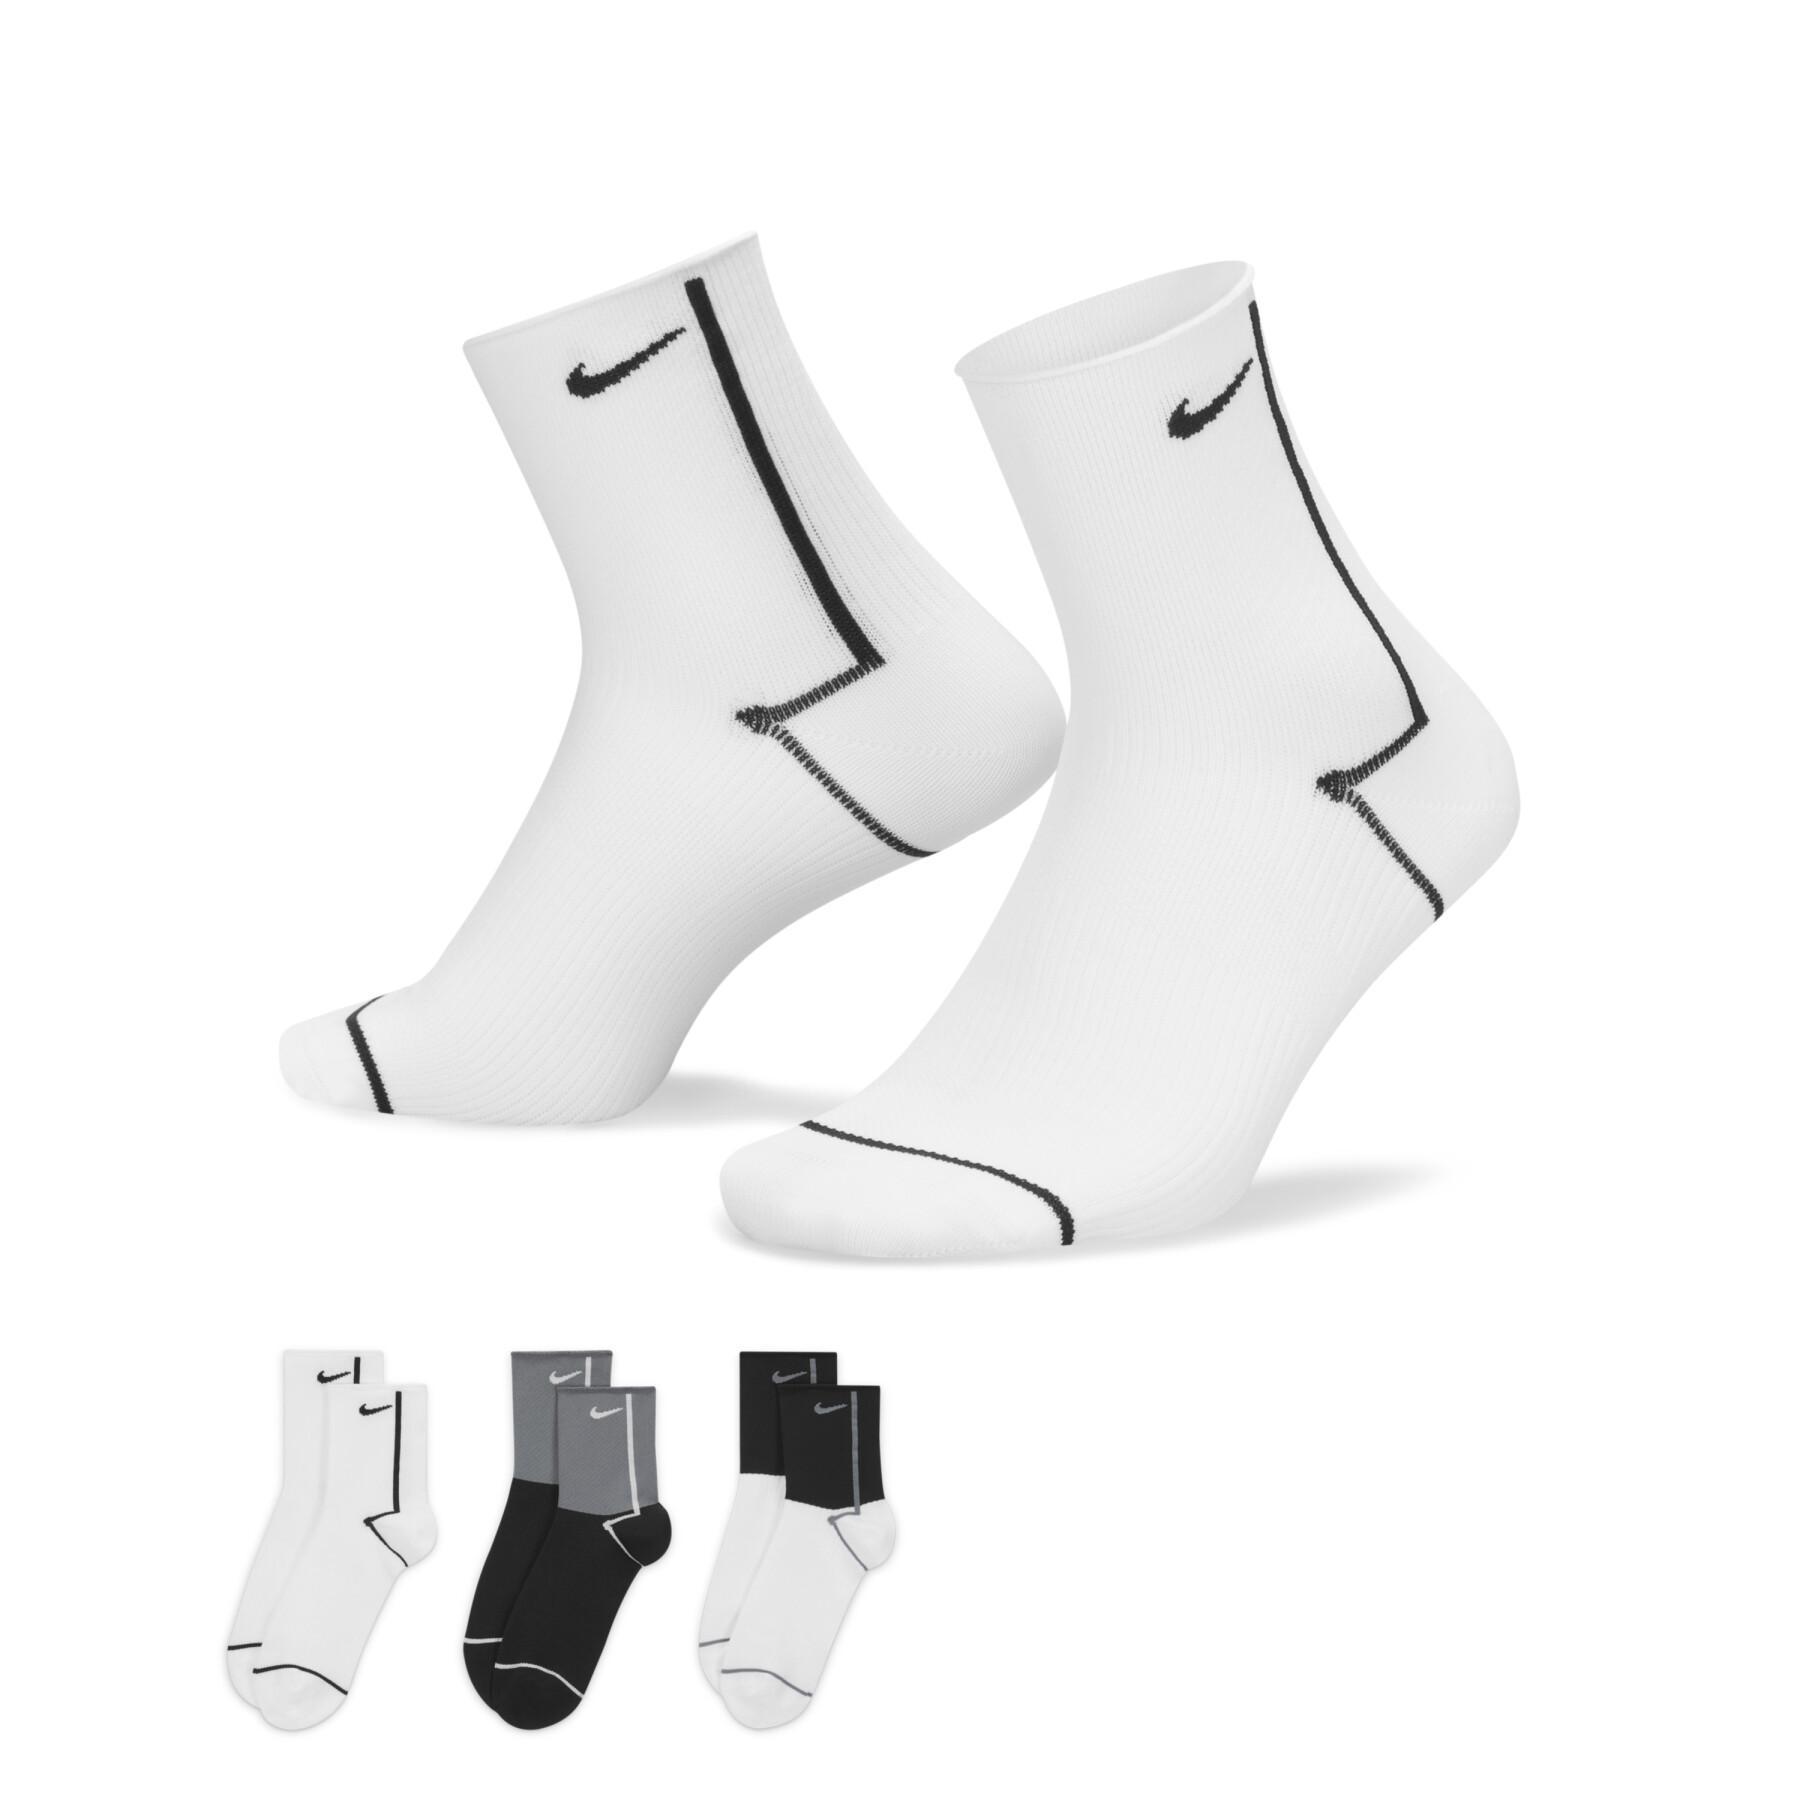 Chaussettes femme Nike Everyday Lightweight - Nike - Chaussettes - Textile